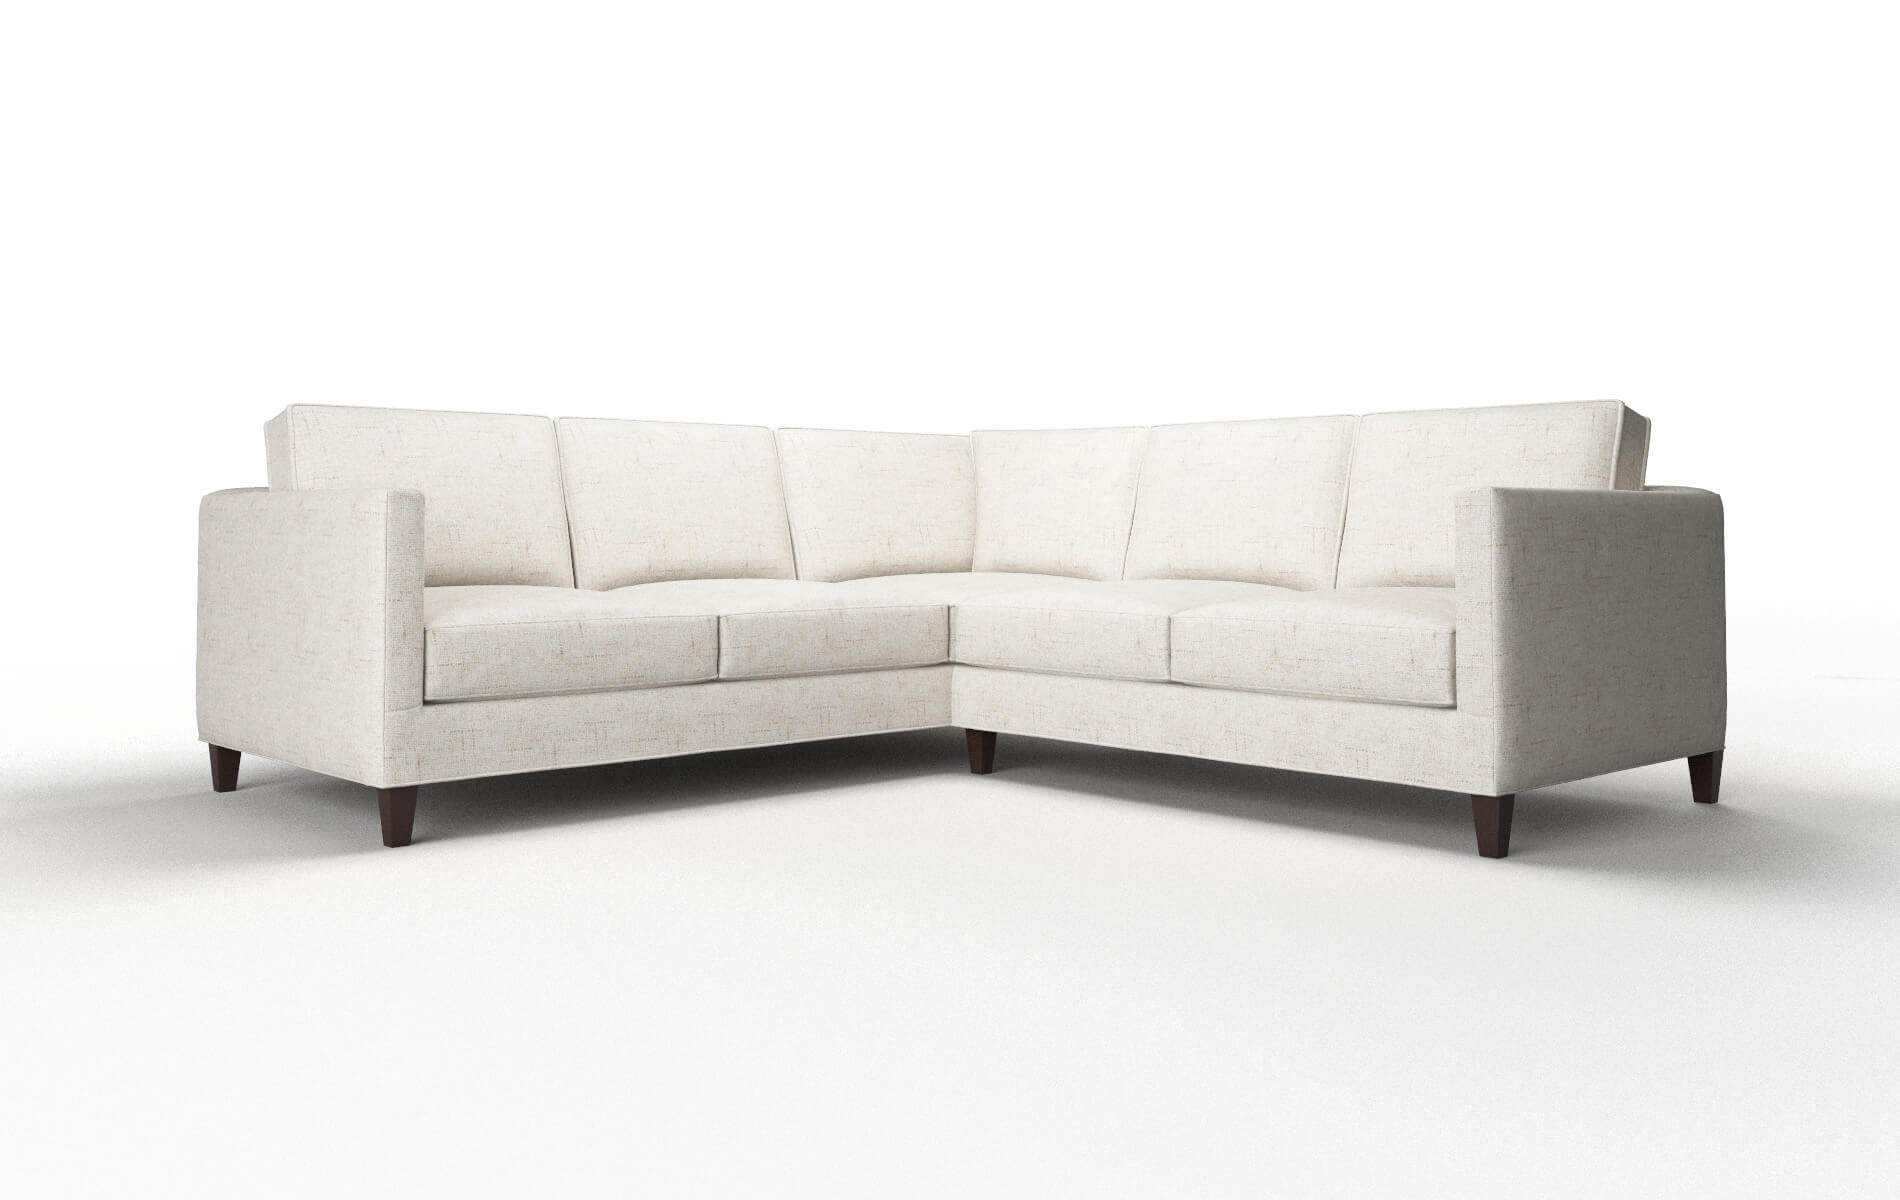 Alps Oceanside Natural Sectional espresso legs